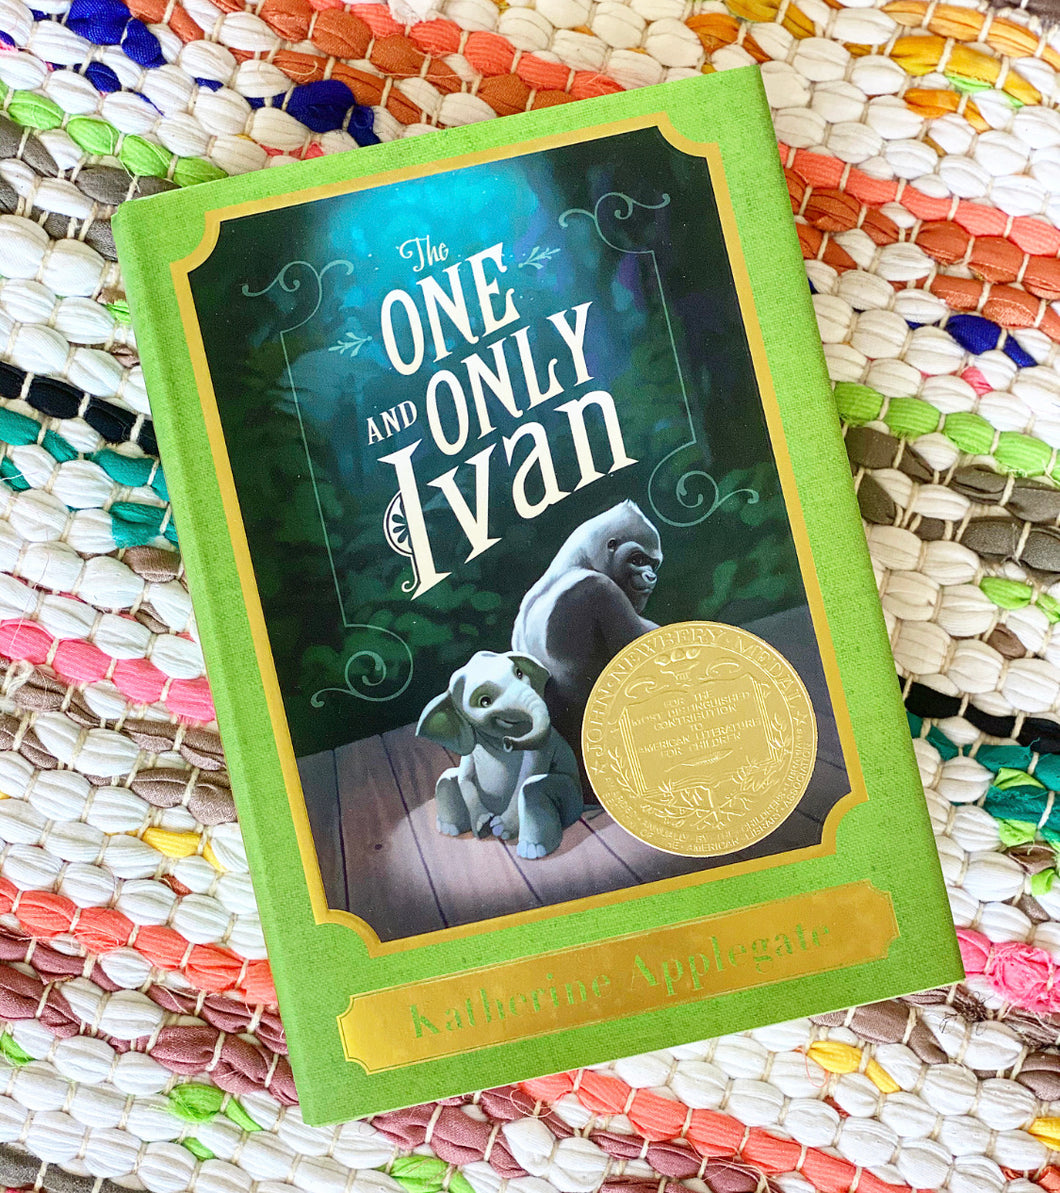 The One and Only Ivan: A Newbery Award Winner (One and Only) | Katherine Applegate